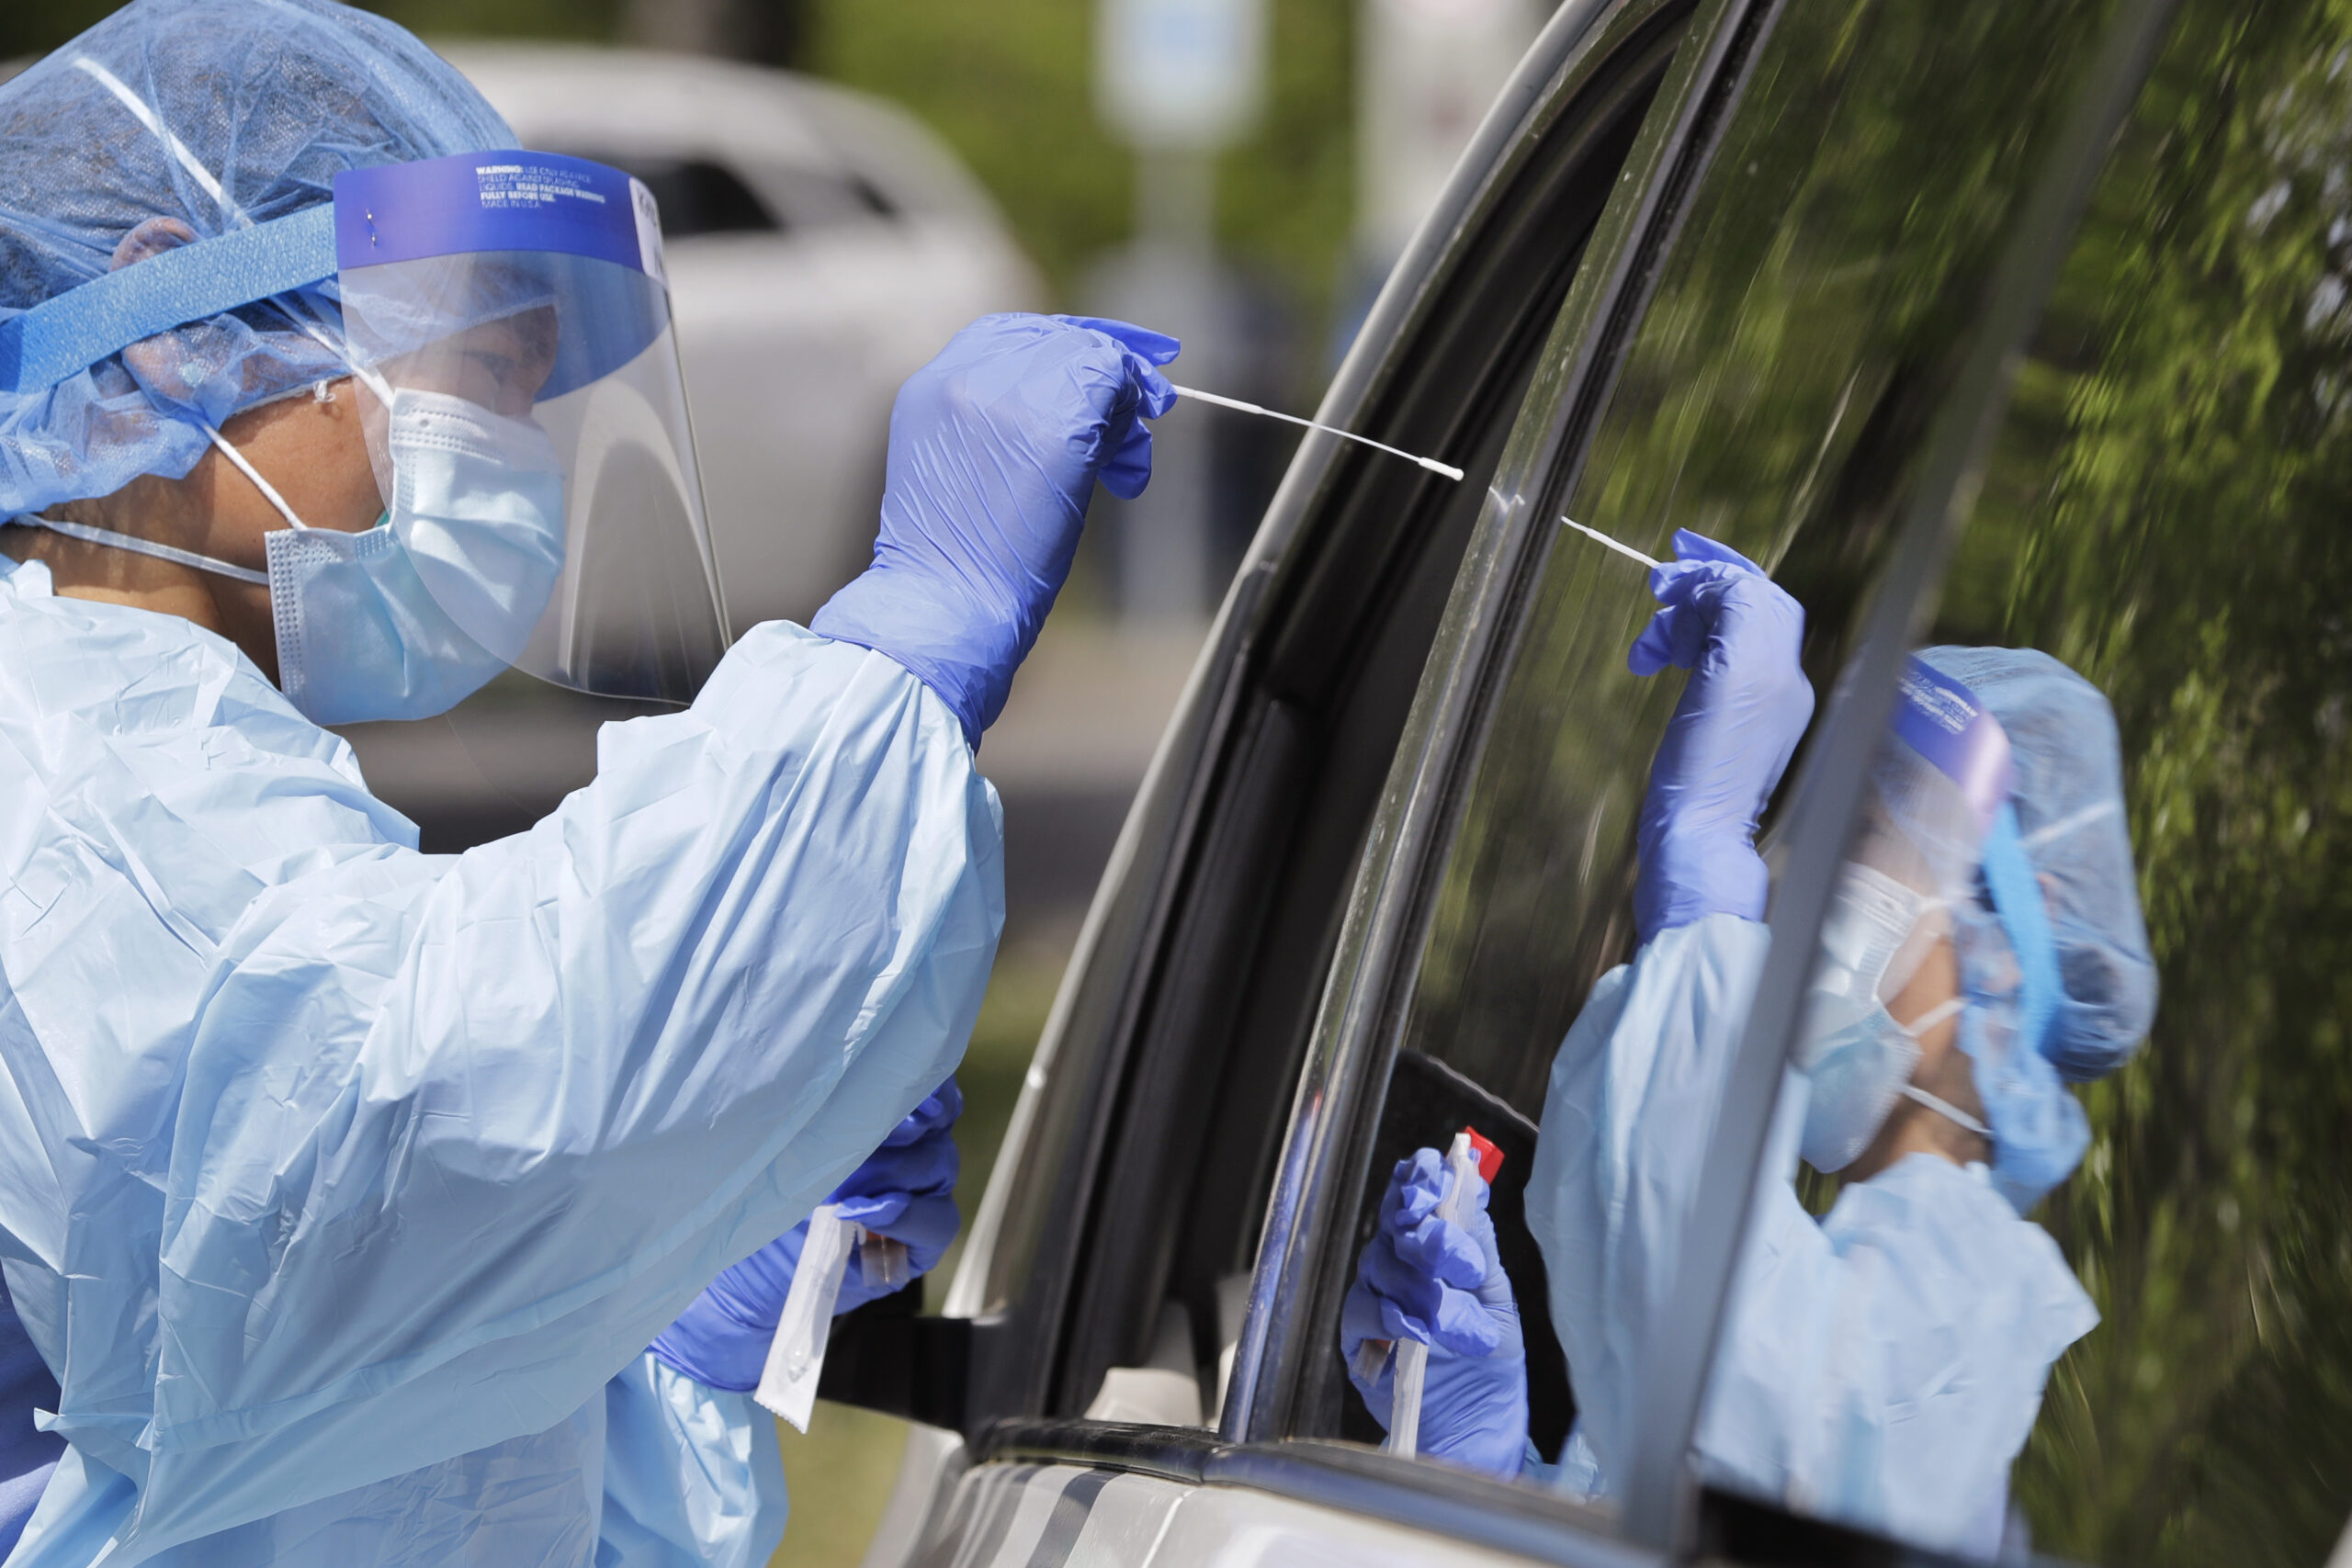 A medical assistant reaches in to take a nasal swab from a driver at a drive-up coronavirus testing site